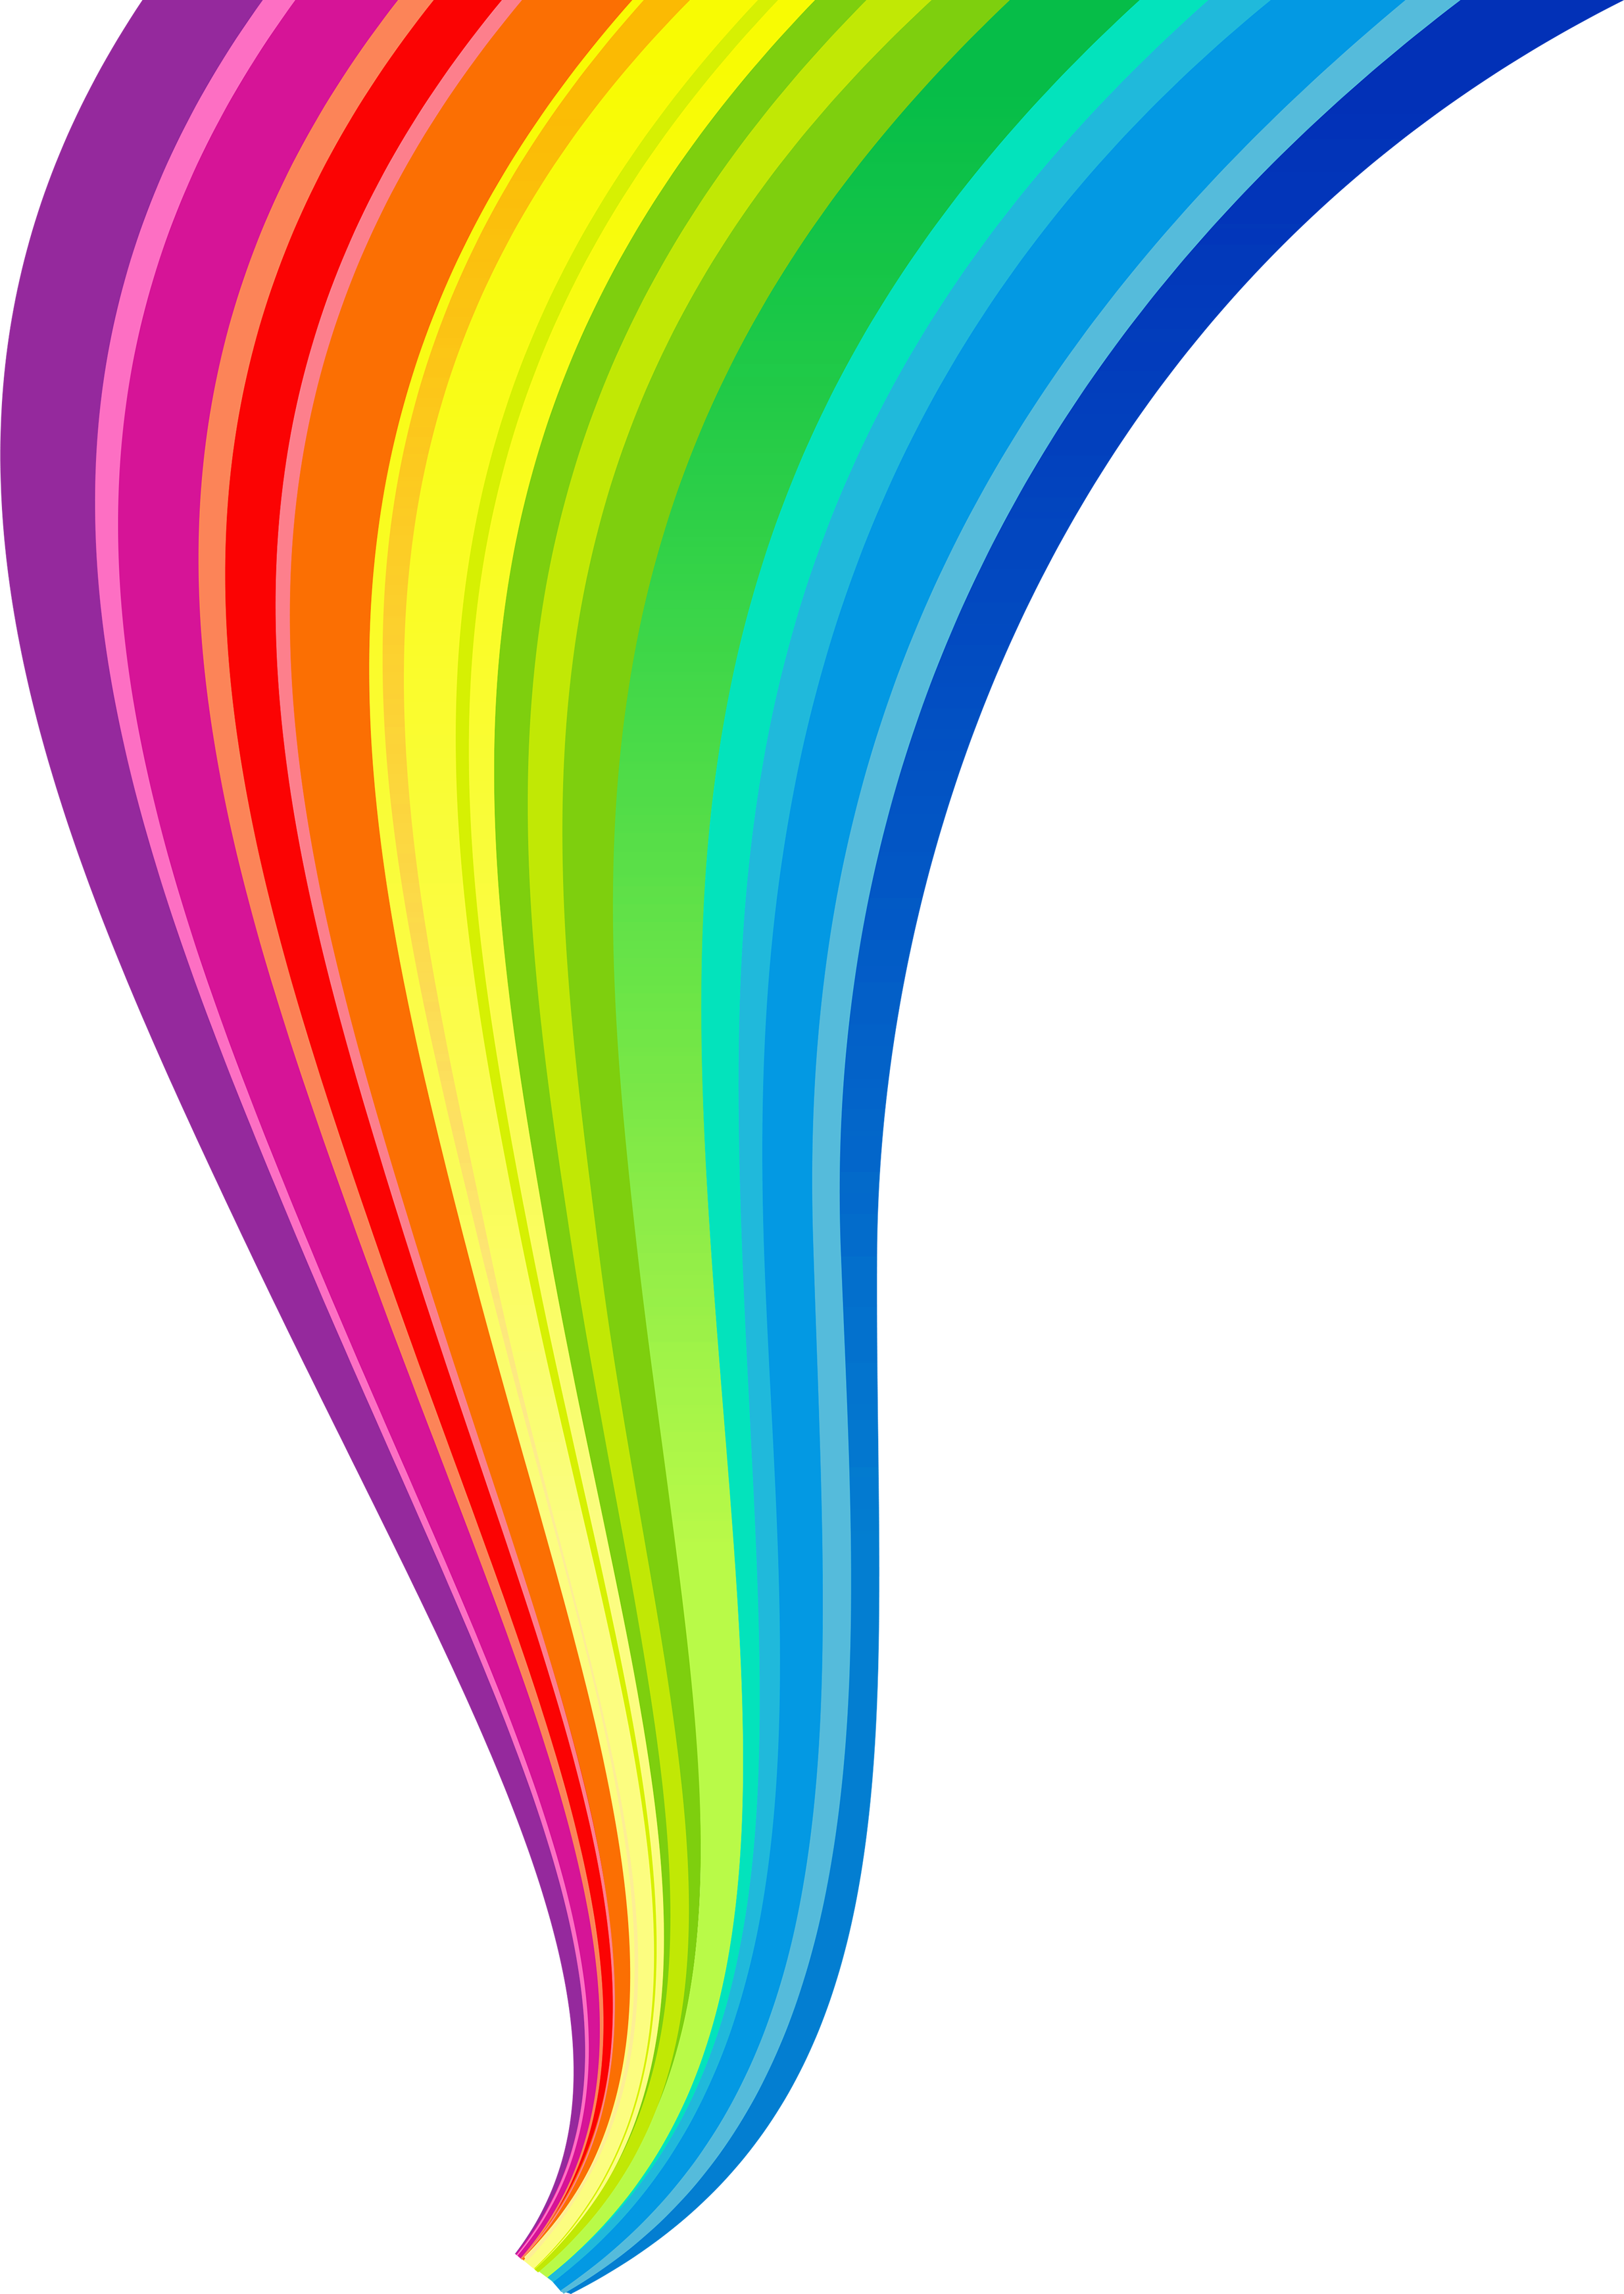 Creative clipart rainbow hand. Png images free download